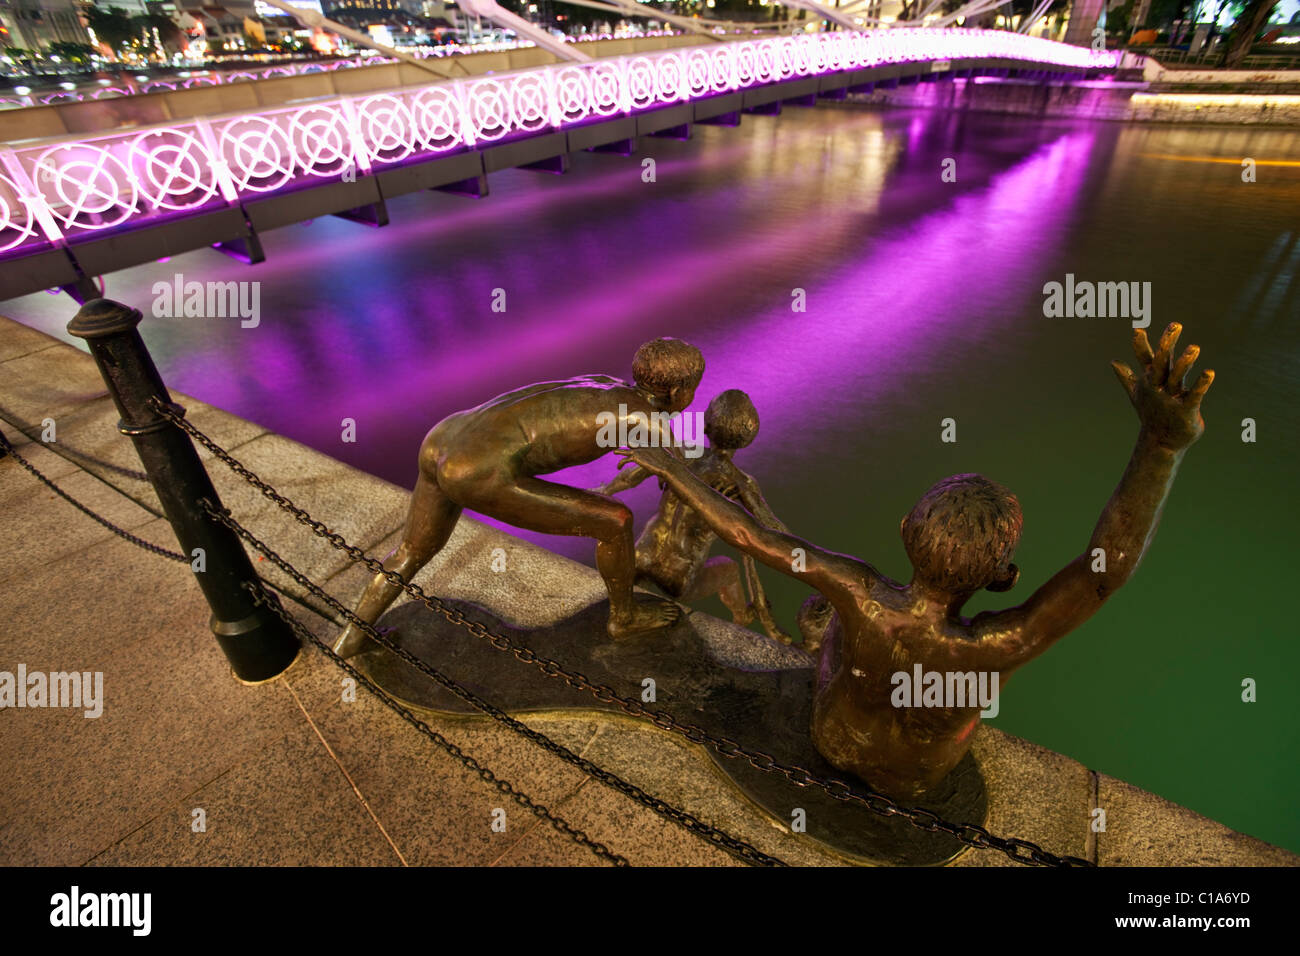 The “First Generation” bronze sculpture by Chong Fah Cheong on the Singapore riverside, Singapore Stock Photo